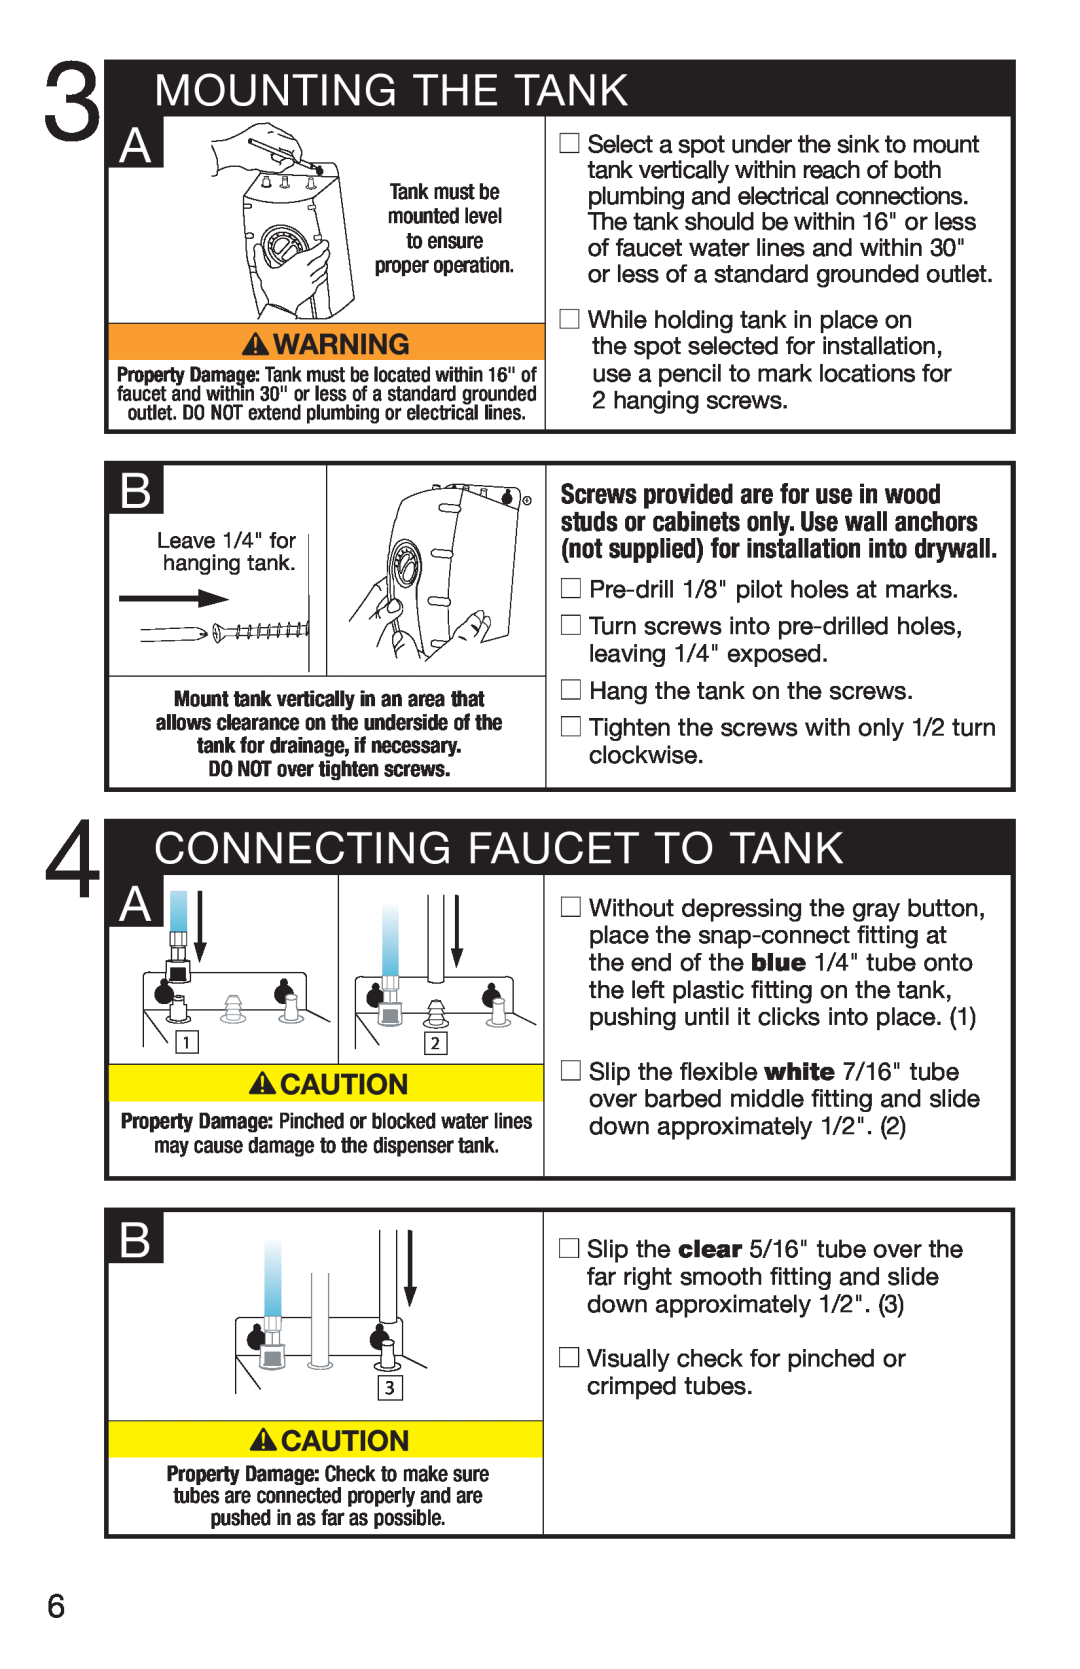 InSinkErator C1300, H778 owner manual Mounting The Tank, Connecting Faucet To Tank 